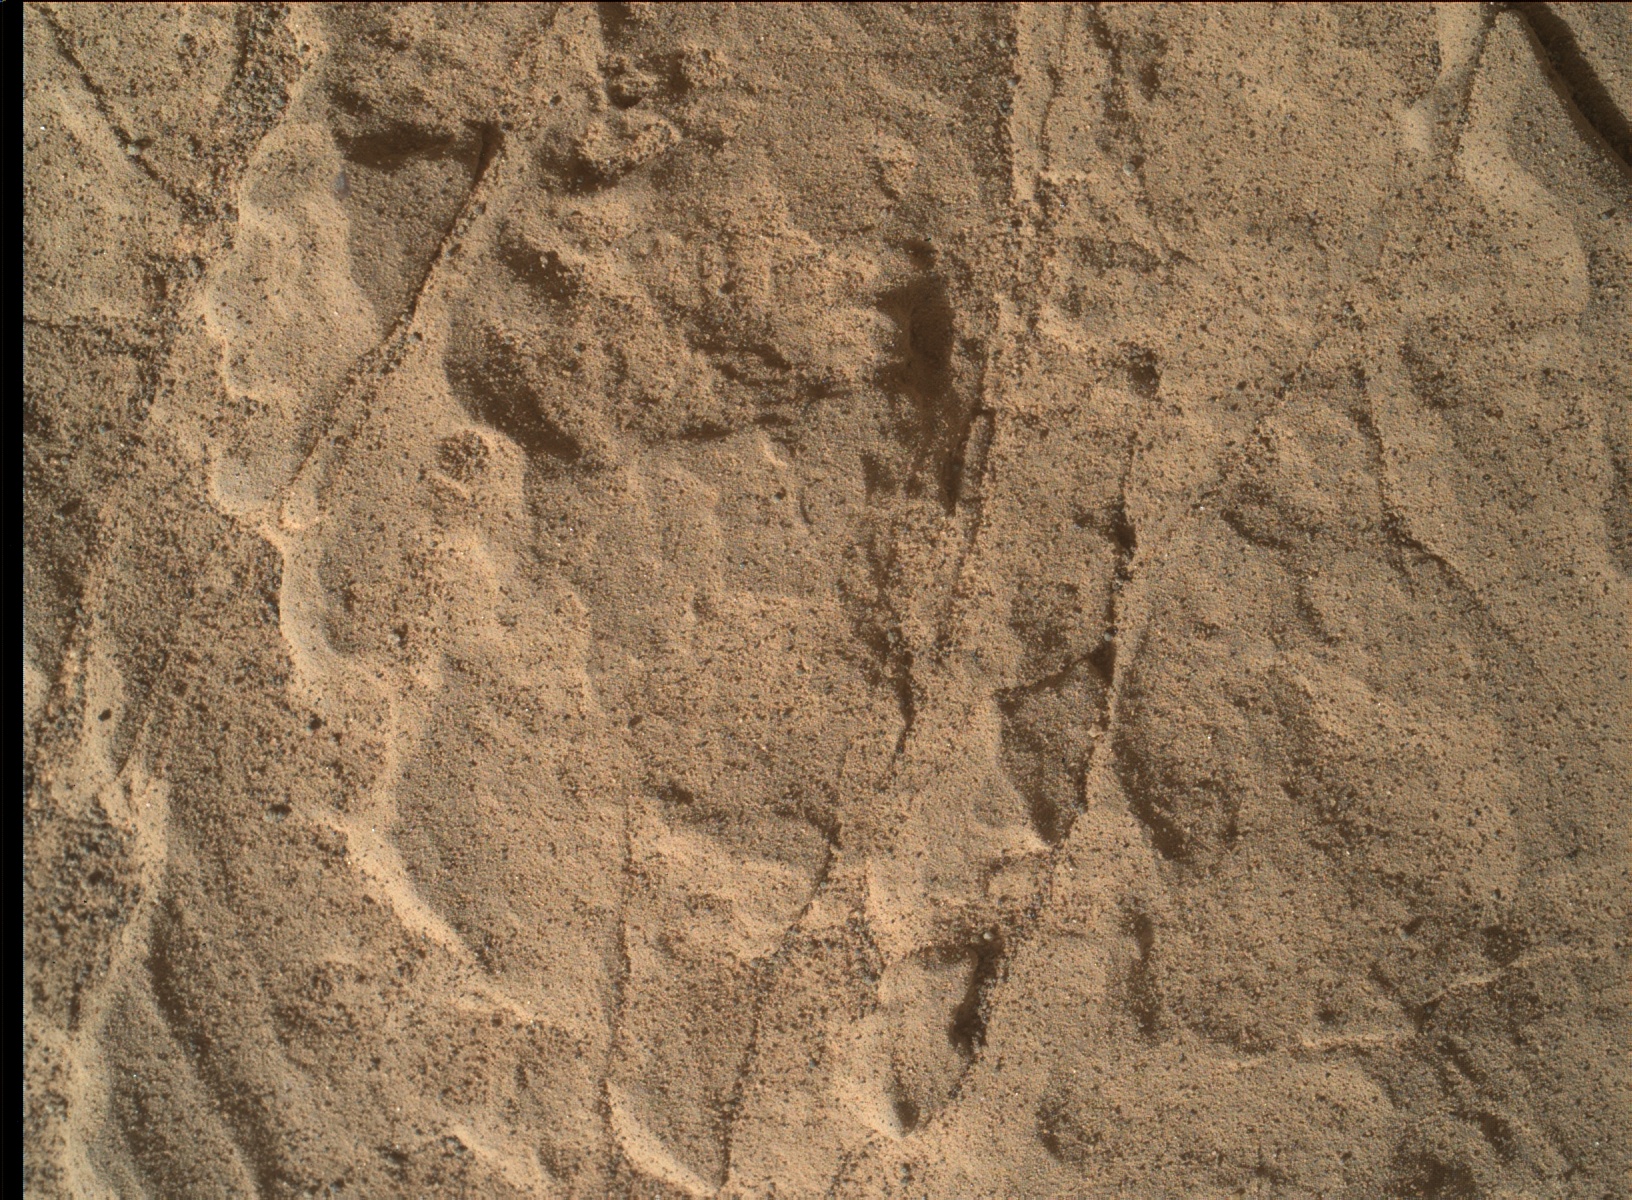 Nasa's Mars rover Curiosity acquired this image using its Mars Hand Lens Imager (MAHLI) on Sol 1845